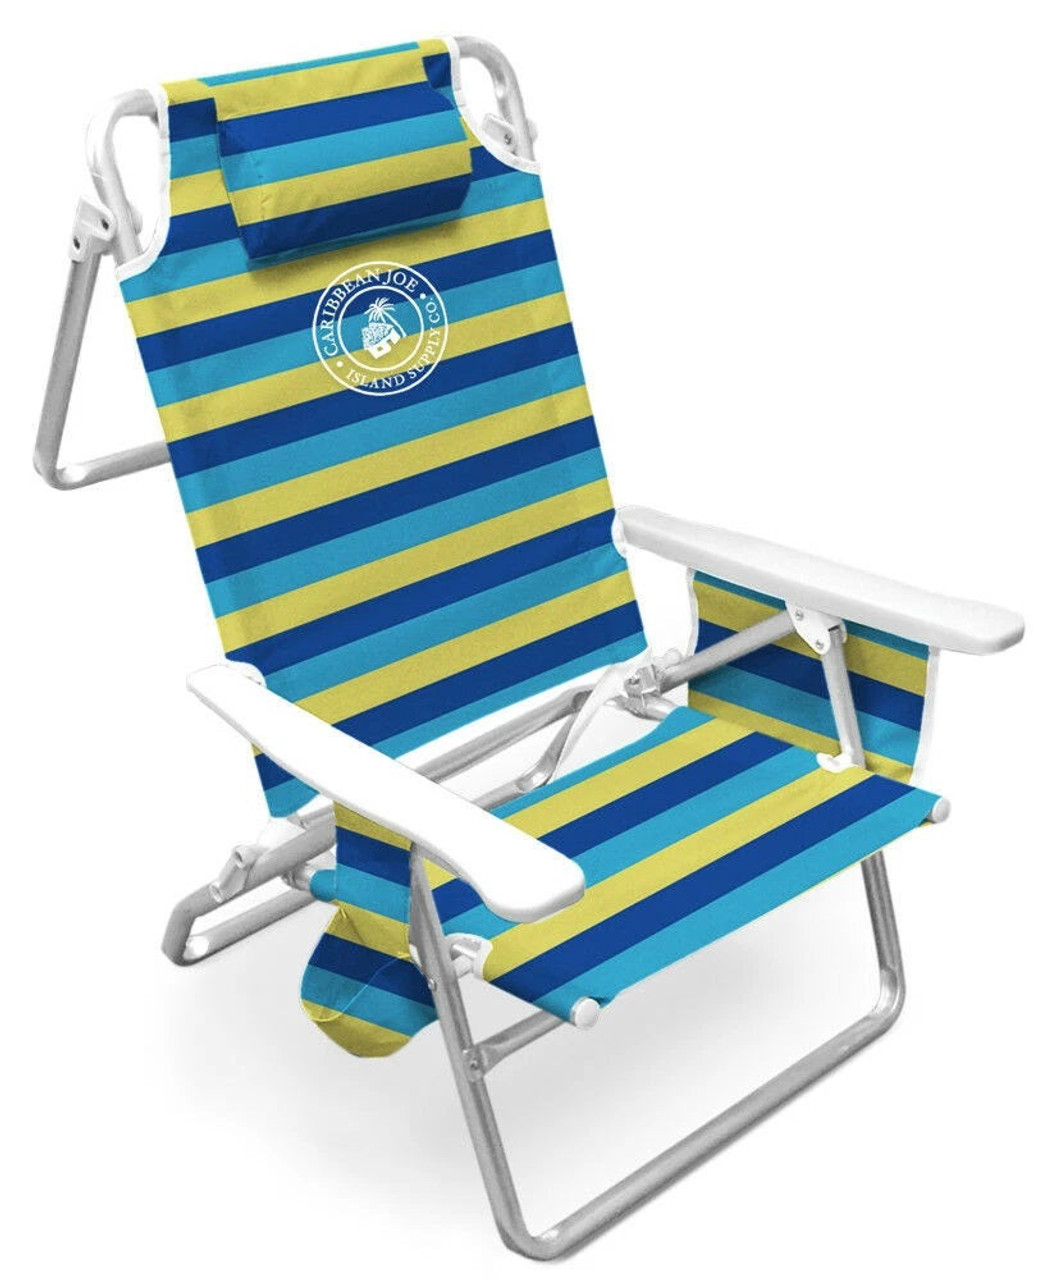 Caribbean Joe 5 Position Beach Chair with Deluxe Polymer Arms